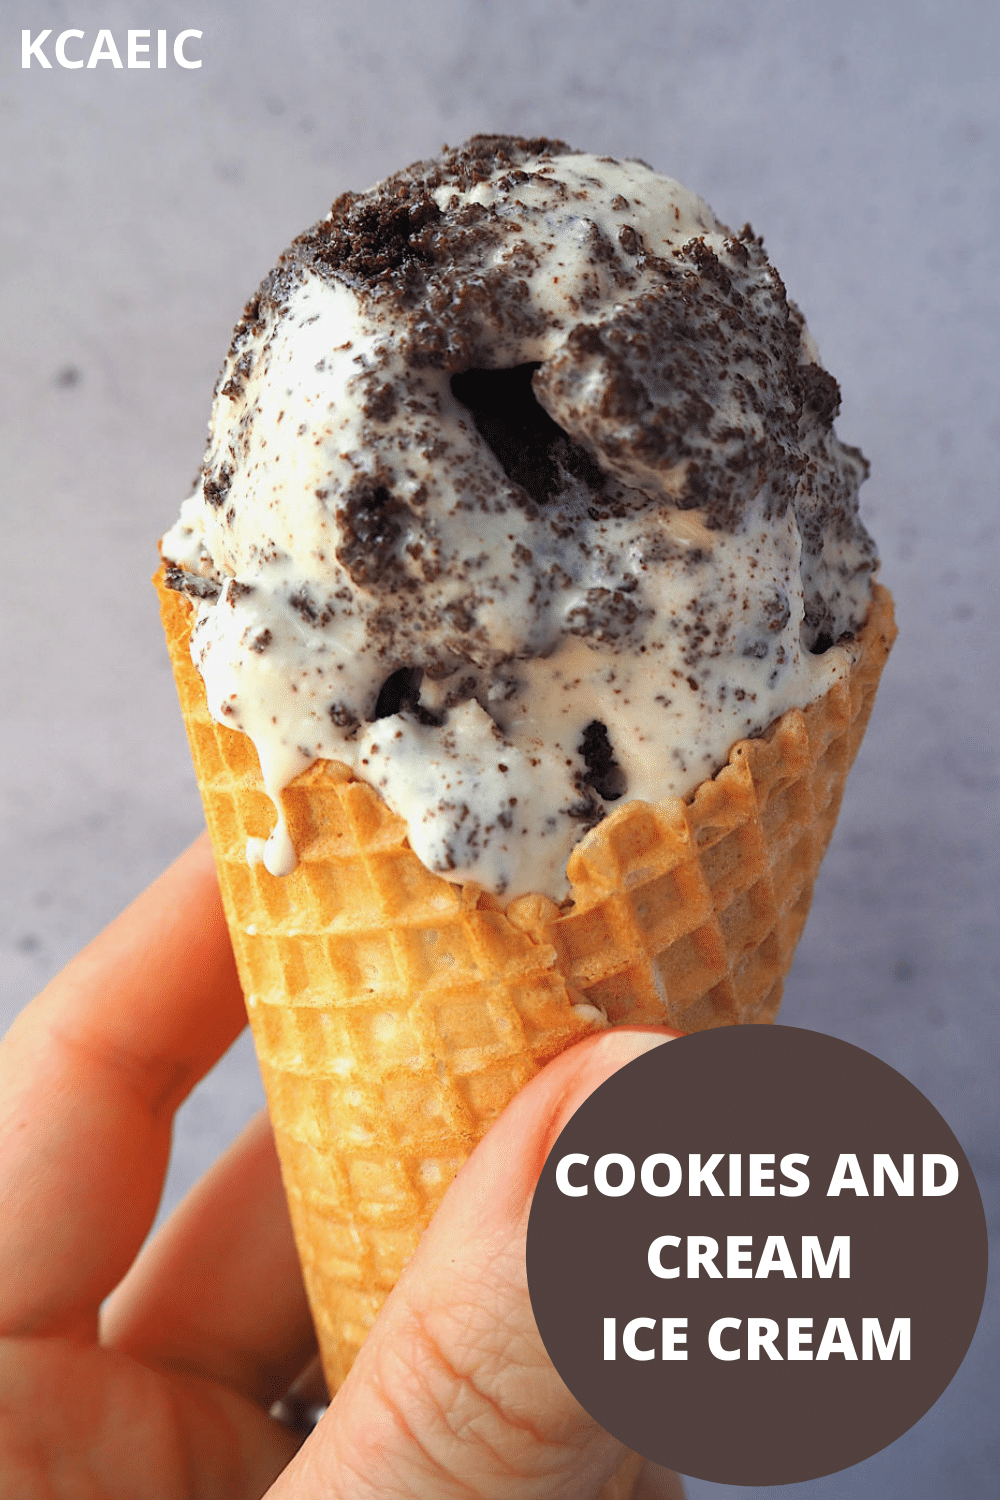 Close up of scoop of cookies and cream ice cream in a waffle cone being held, with text overlay, cookies and cream ice cream, KCAEIC.